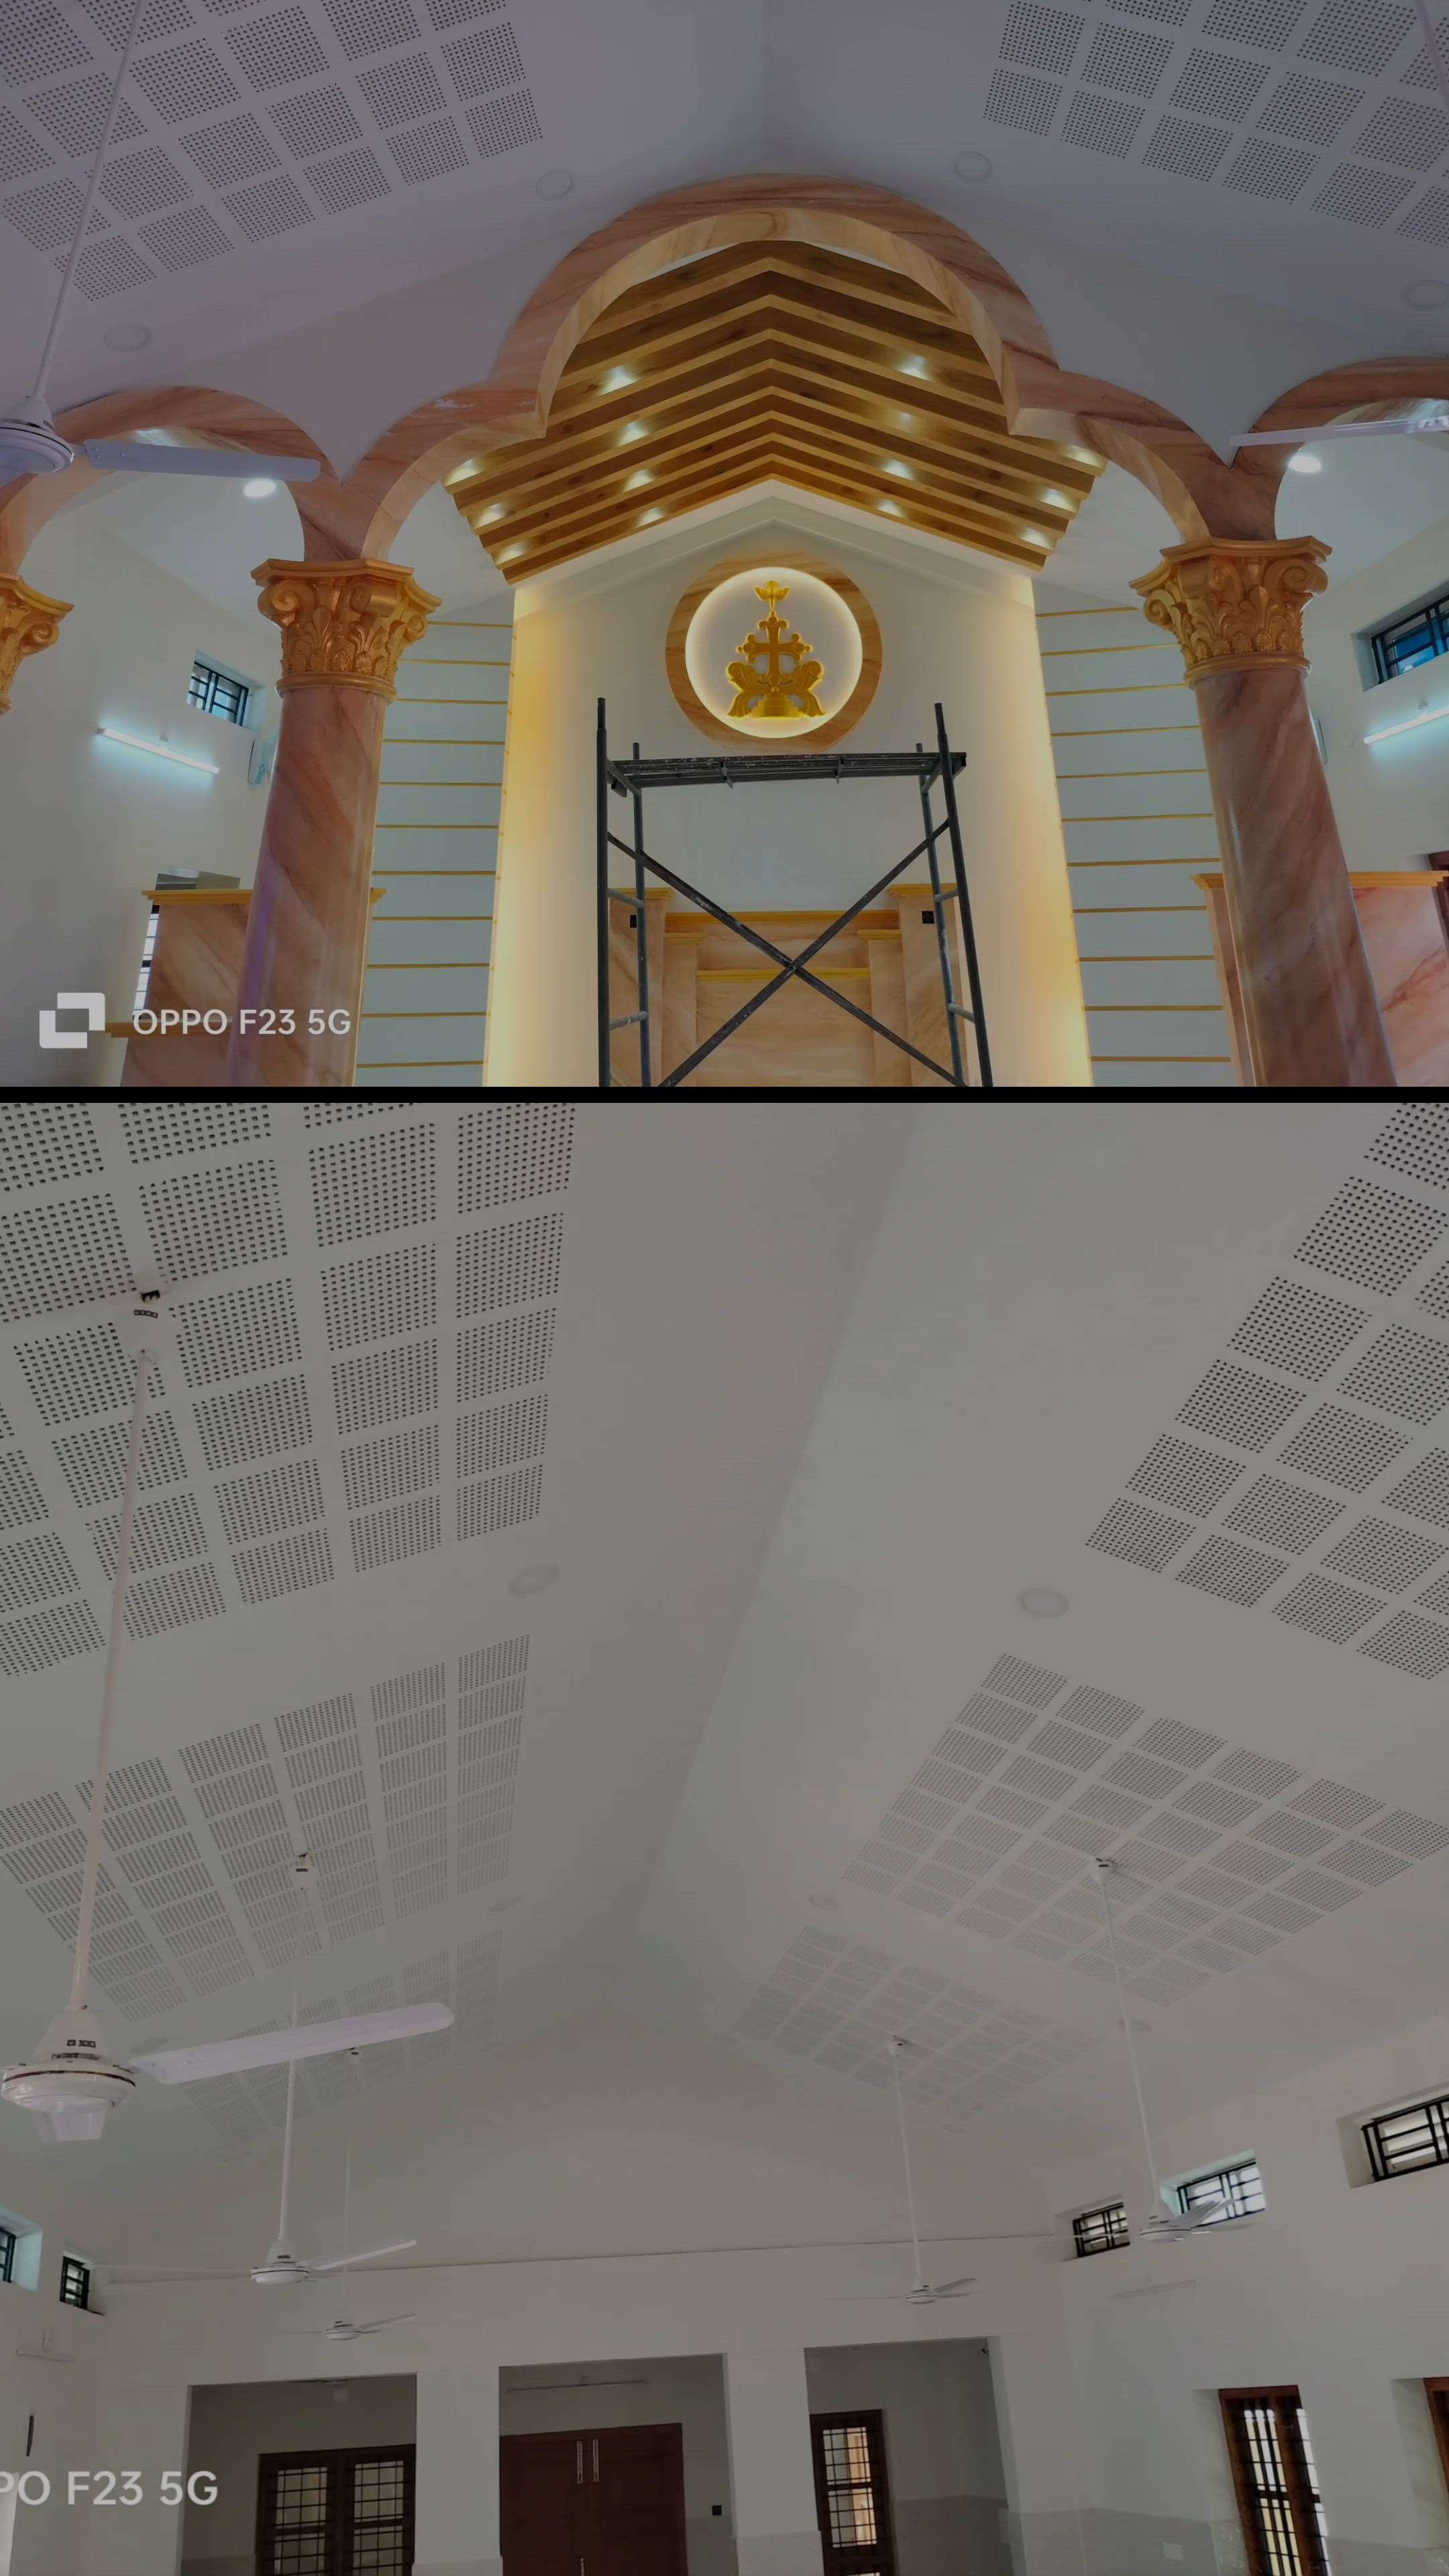 Gypsum work with Acoustic Board ceiling work completed @ Koodalloor Church , Kottayam.

skyfortroofing.com

📞98471 90501

 -94967 69501

  9072310416 (Office)

📩info@skyfortroofing.com

.
.
.
.
.
.
.
.
.
..
.

#roofing #rooftop #roofing contractor #roofingcompany #roofingservices #roofingsolutions #roofingkerala #ernakulam #kochi #perumbavoor #kerlaroof #keralaroofing #keralanewhome #newconstructionhomes #newconstruction #keralaconstruction #sky #Skyfort #skyfortroofing #allkerala #all #keraladelivery #alldelivery